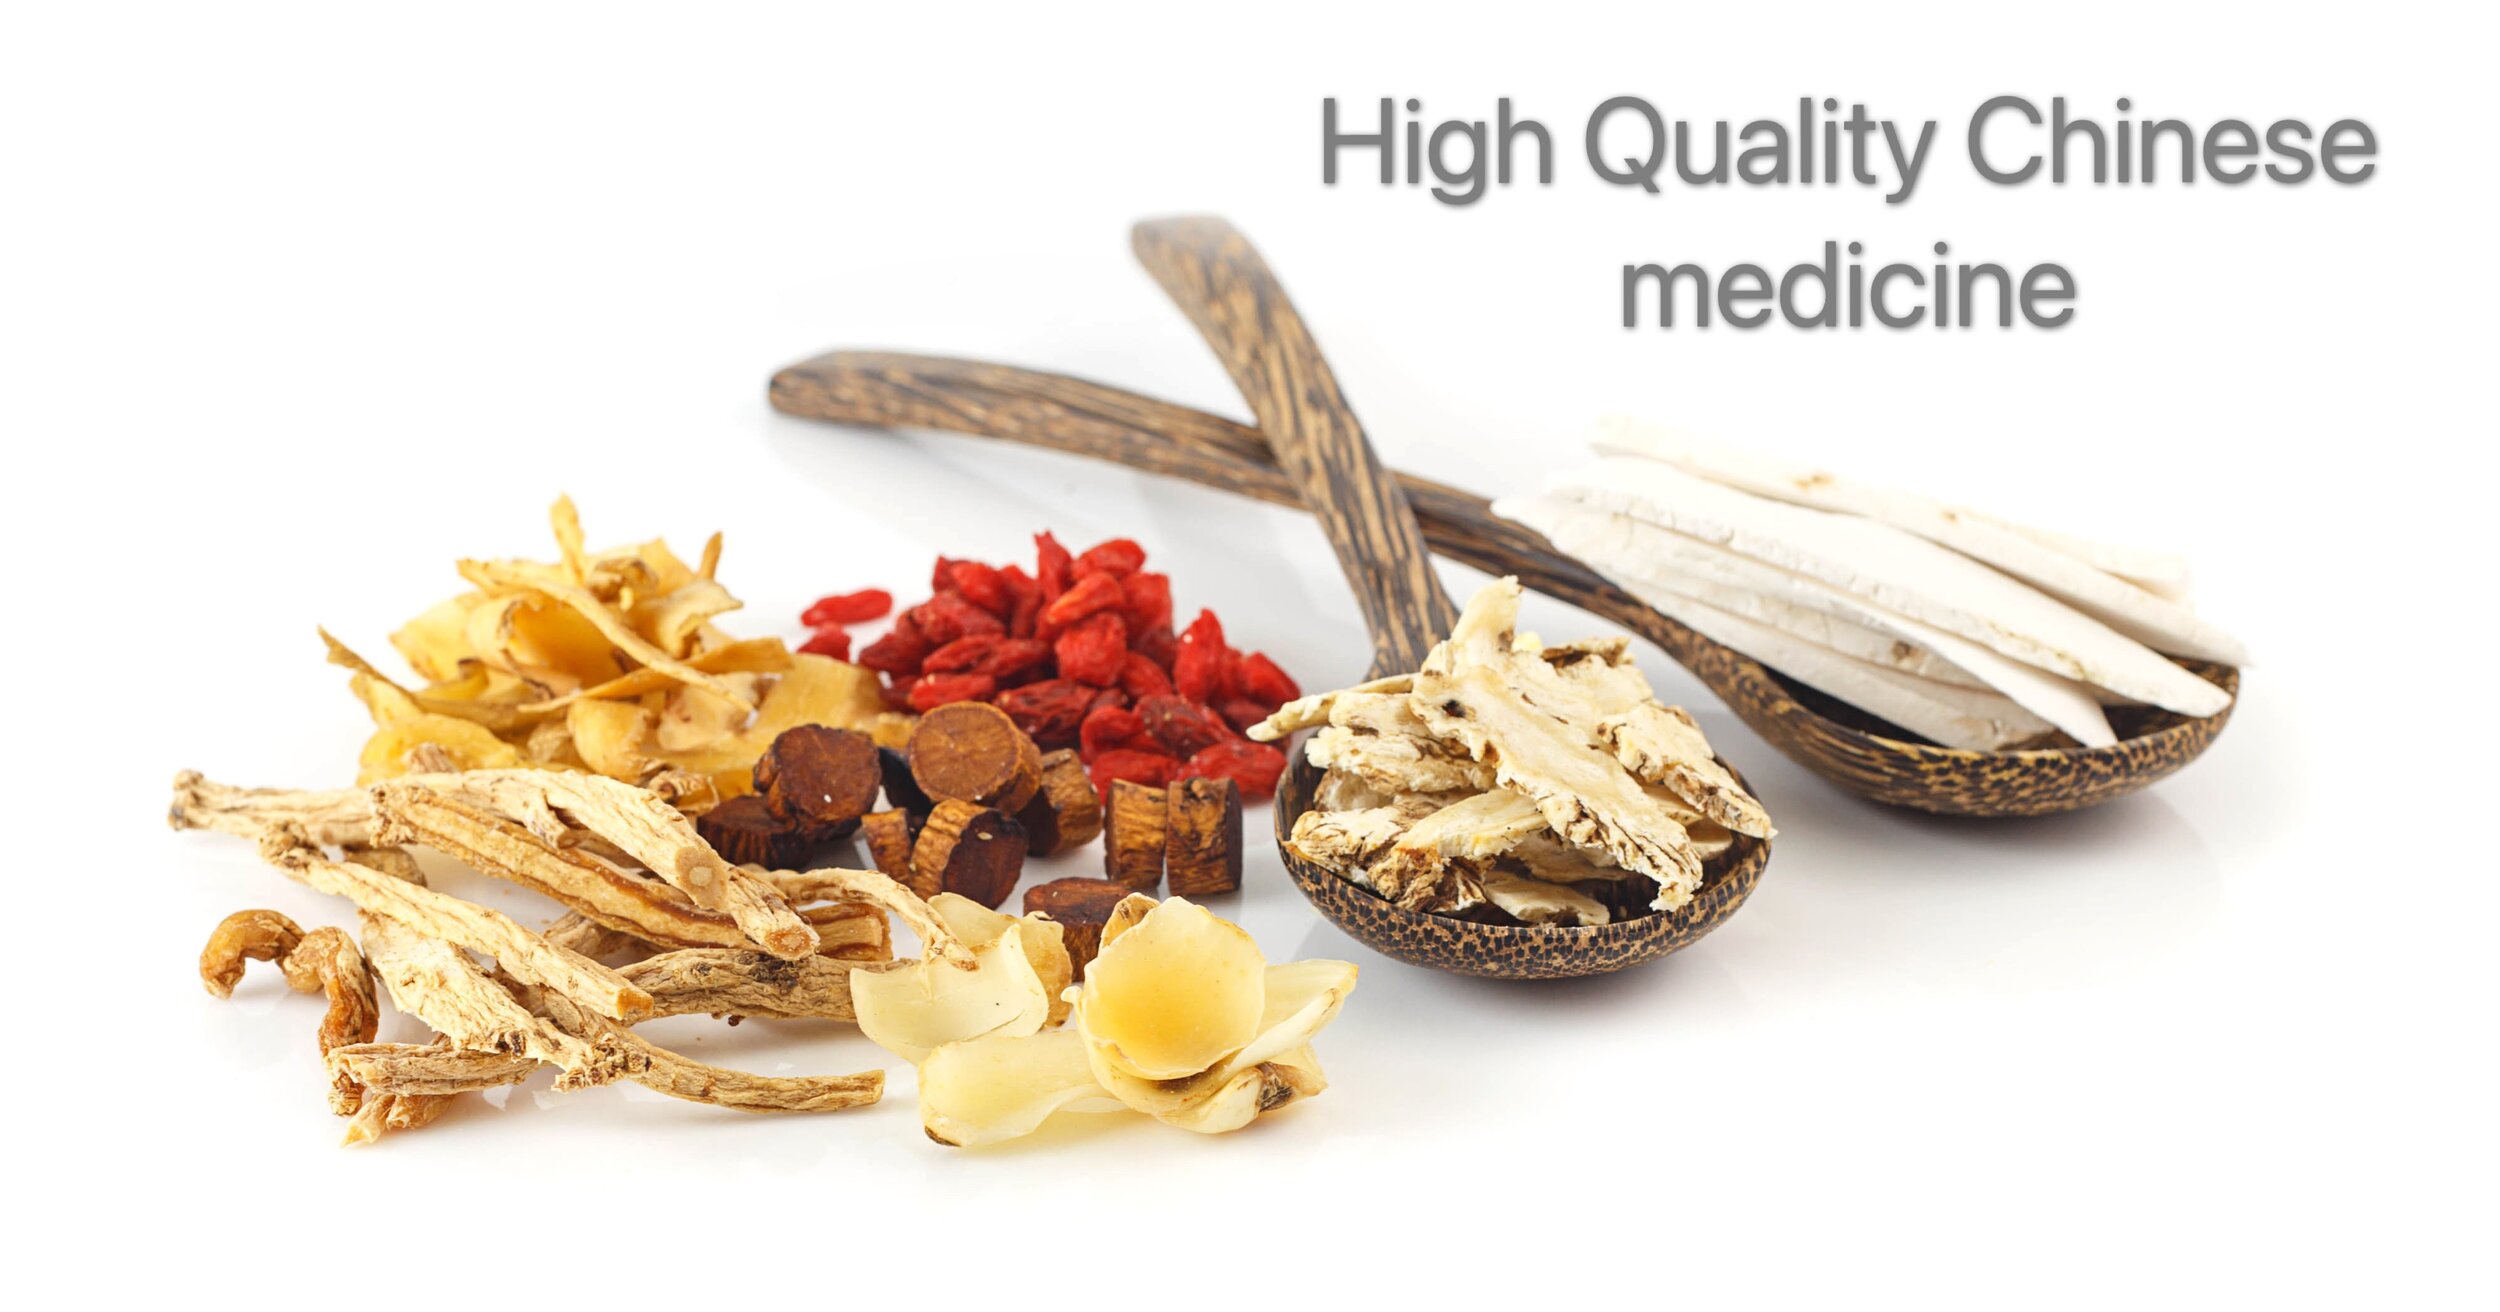 Chinese herbal Medicine picture.jpg